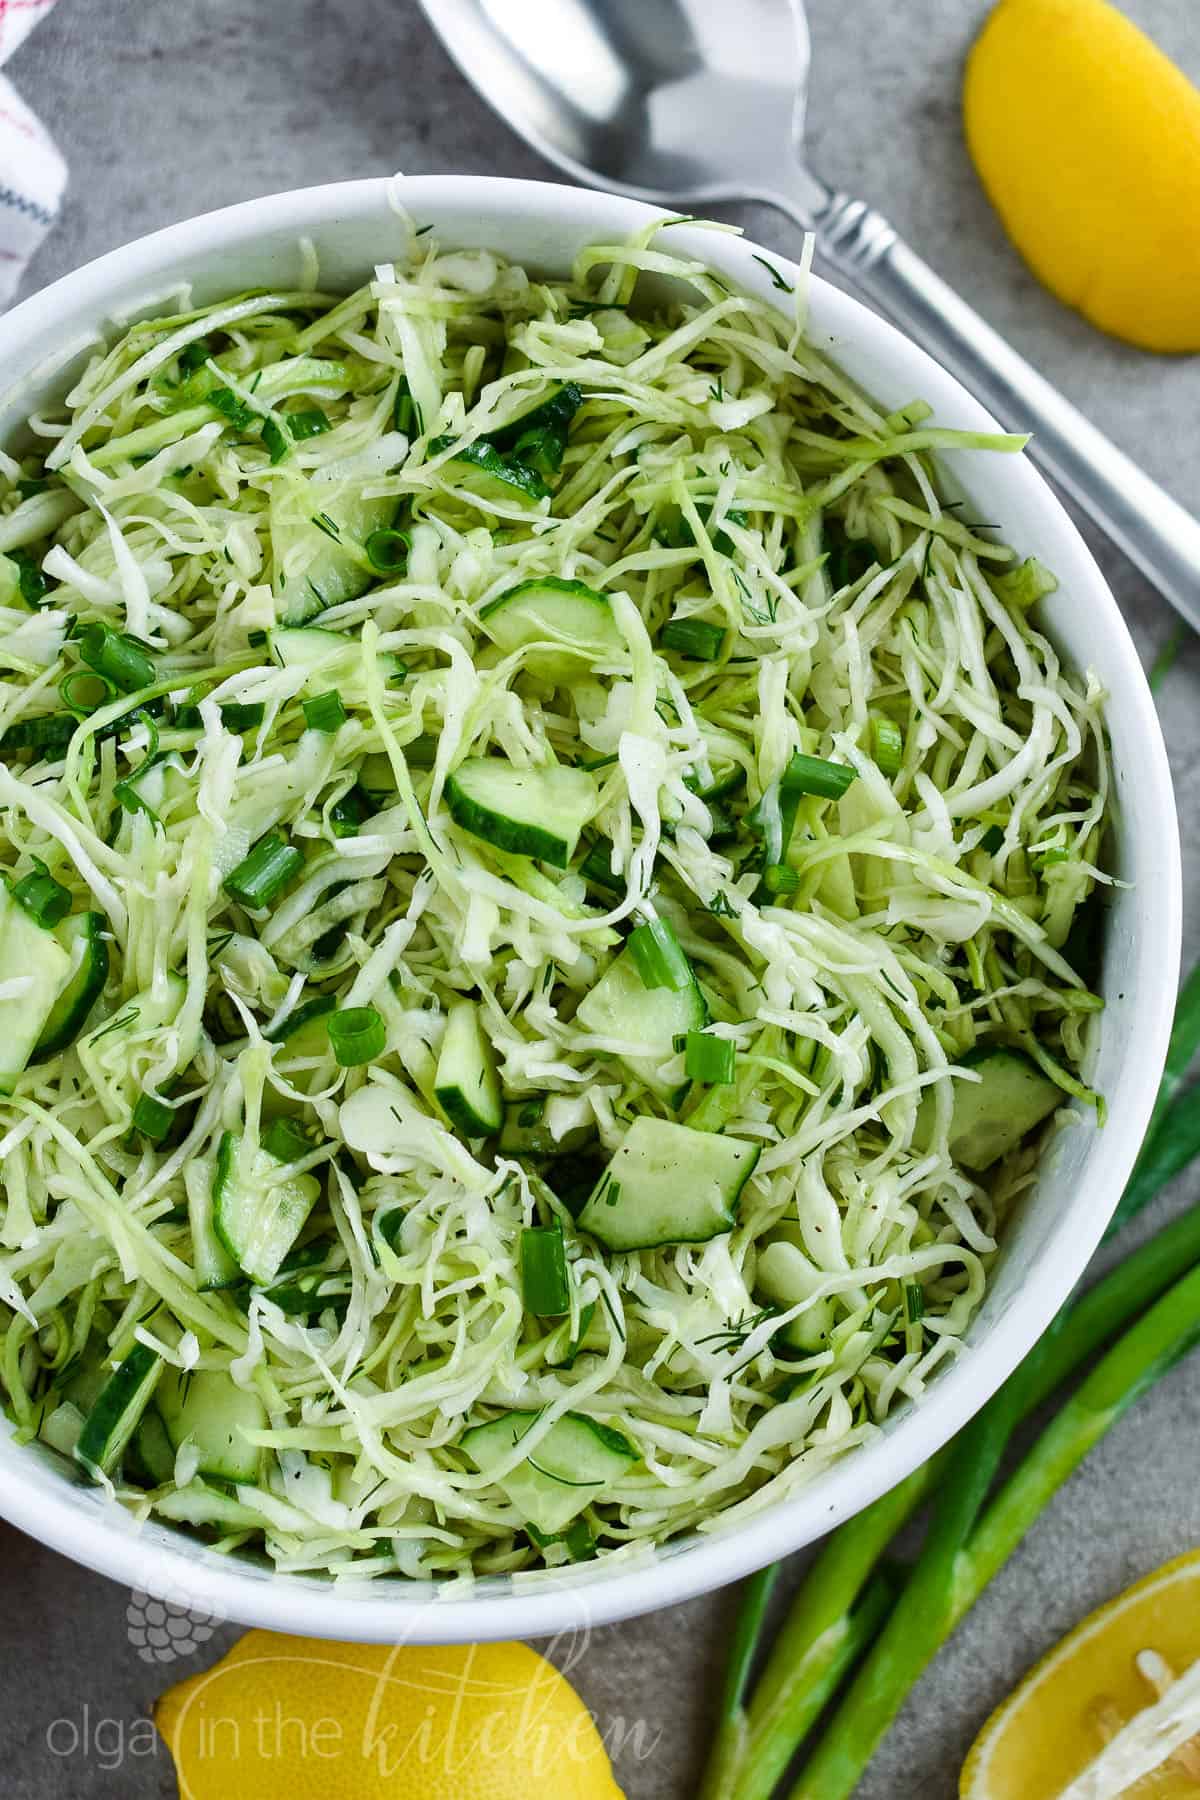 Easy Green Cabbage Cucumber Salad is loaded with fresh green cabbage, crisp cucumbers and fresh herbs. It’s the perfect side dish for potlucks, parties and barbecue. #cabbagesalad #olgainthekitchen #salad #healthy #easyrecipe #cucumbersalad #cabbagecucumber #holiday #easter